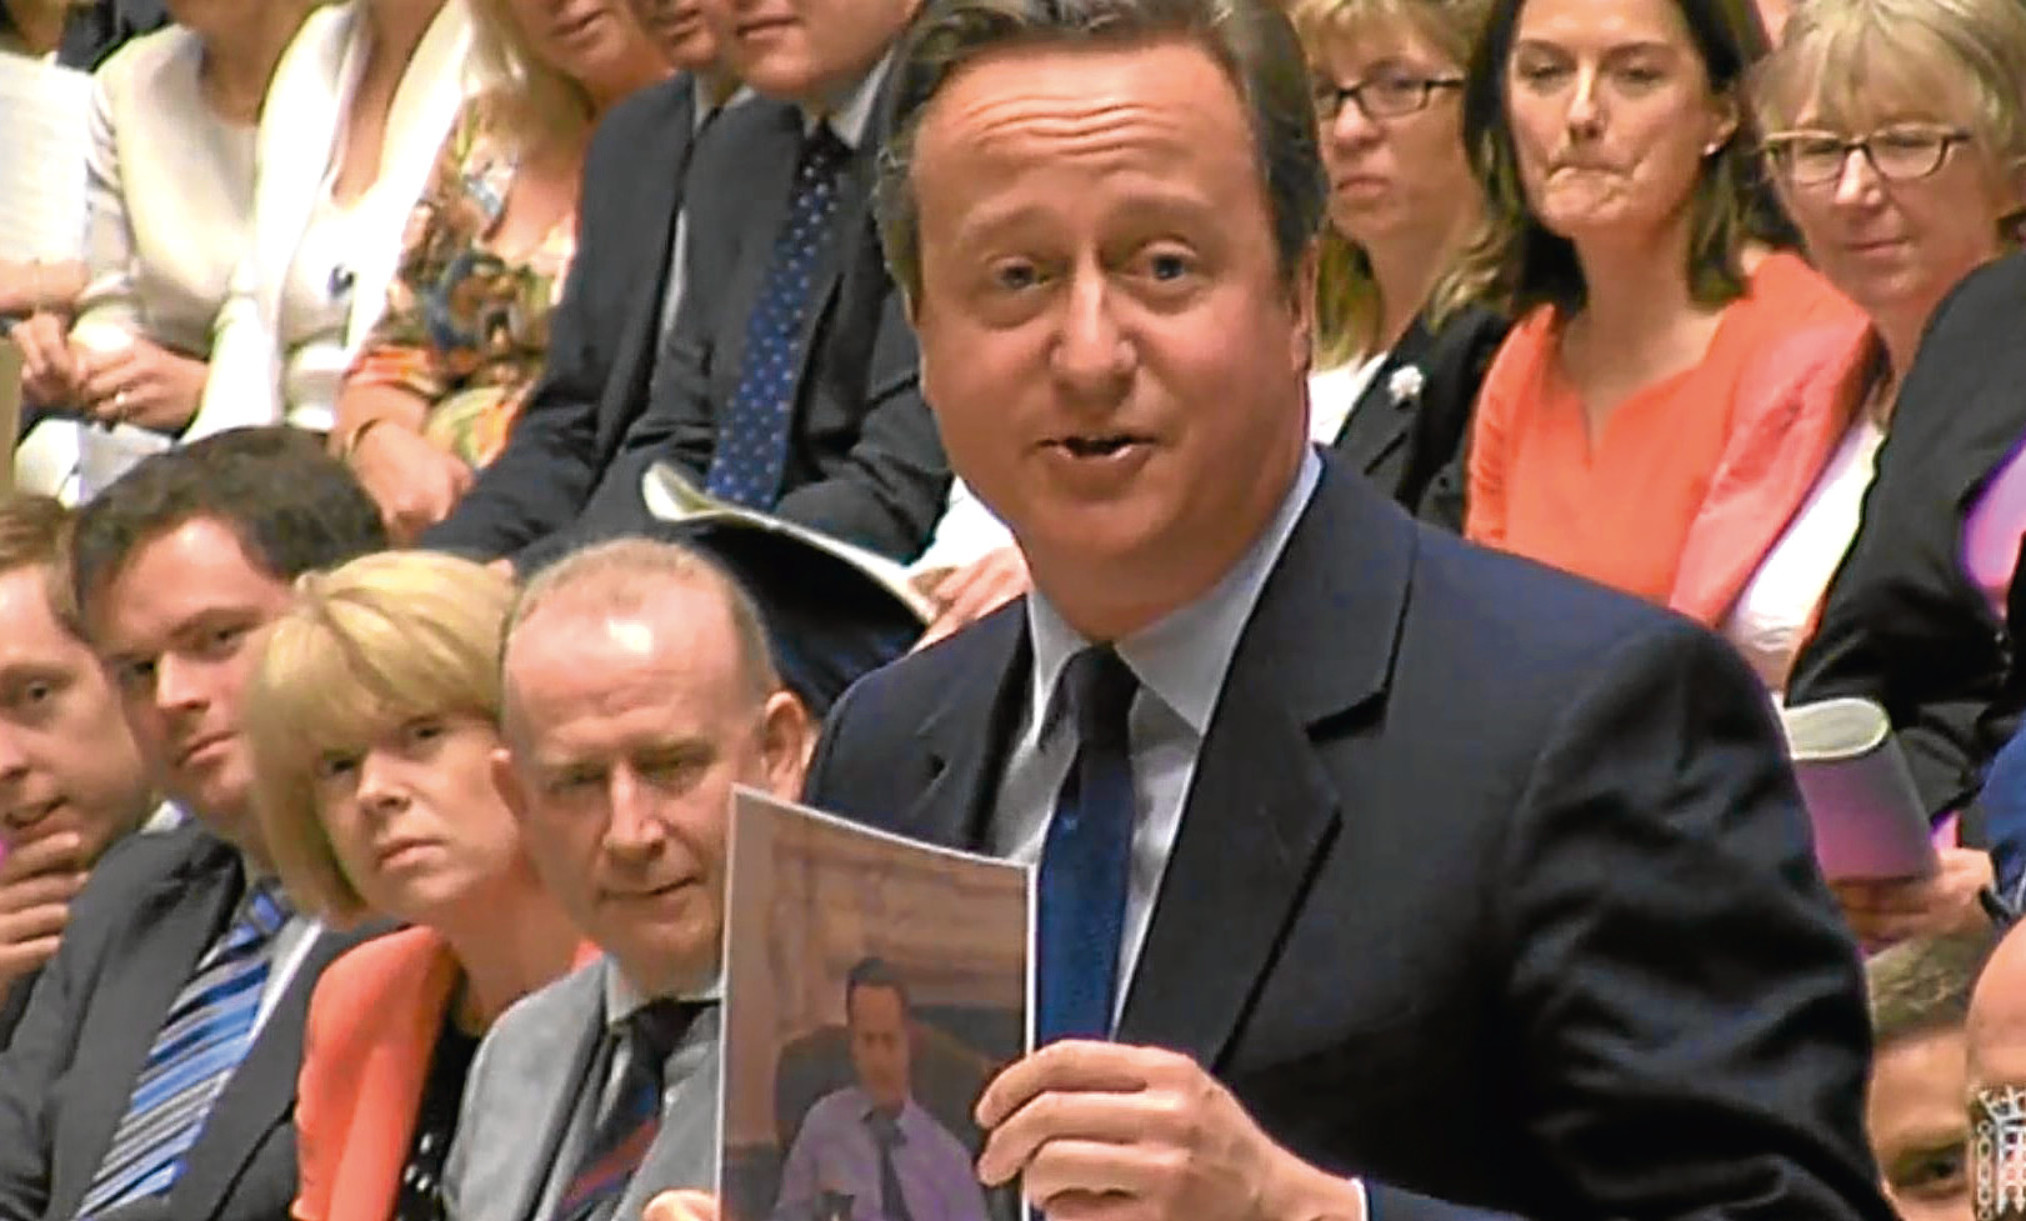 Prime Minister David Cameron at his last Prime Minister's Questions